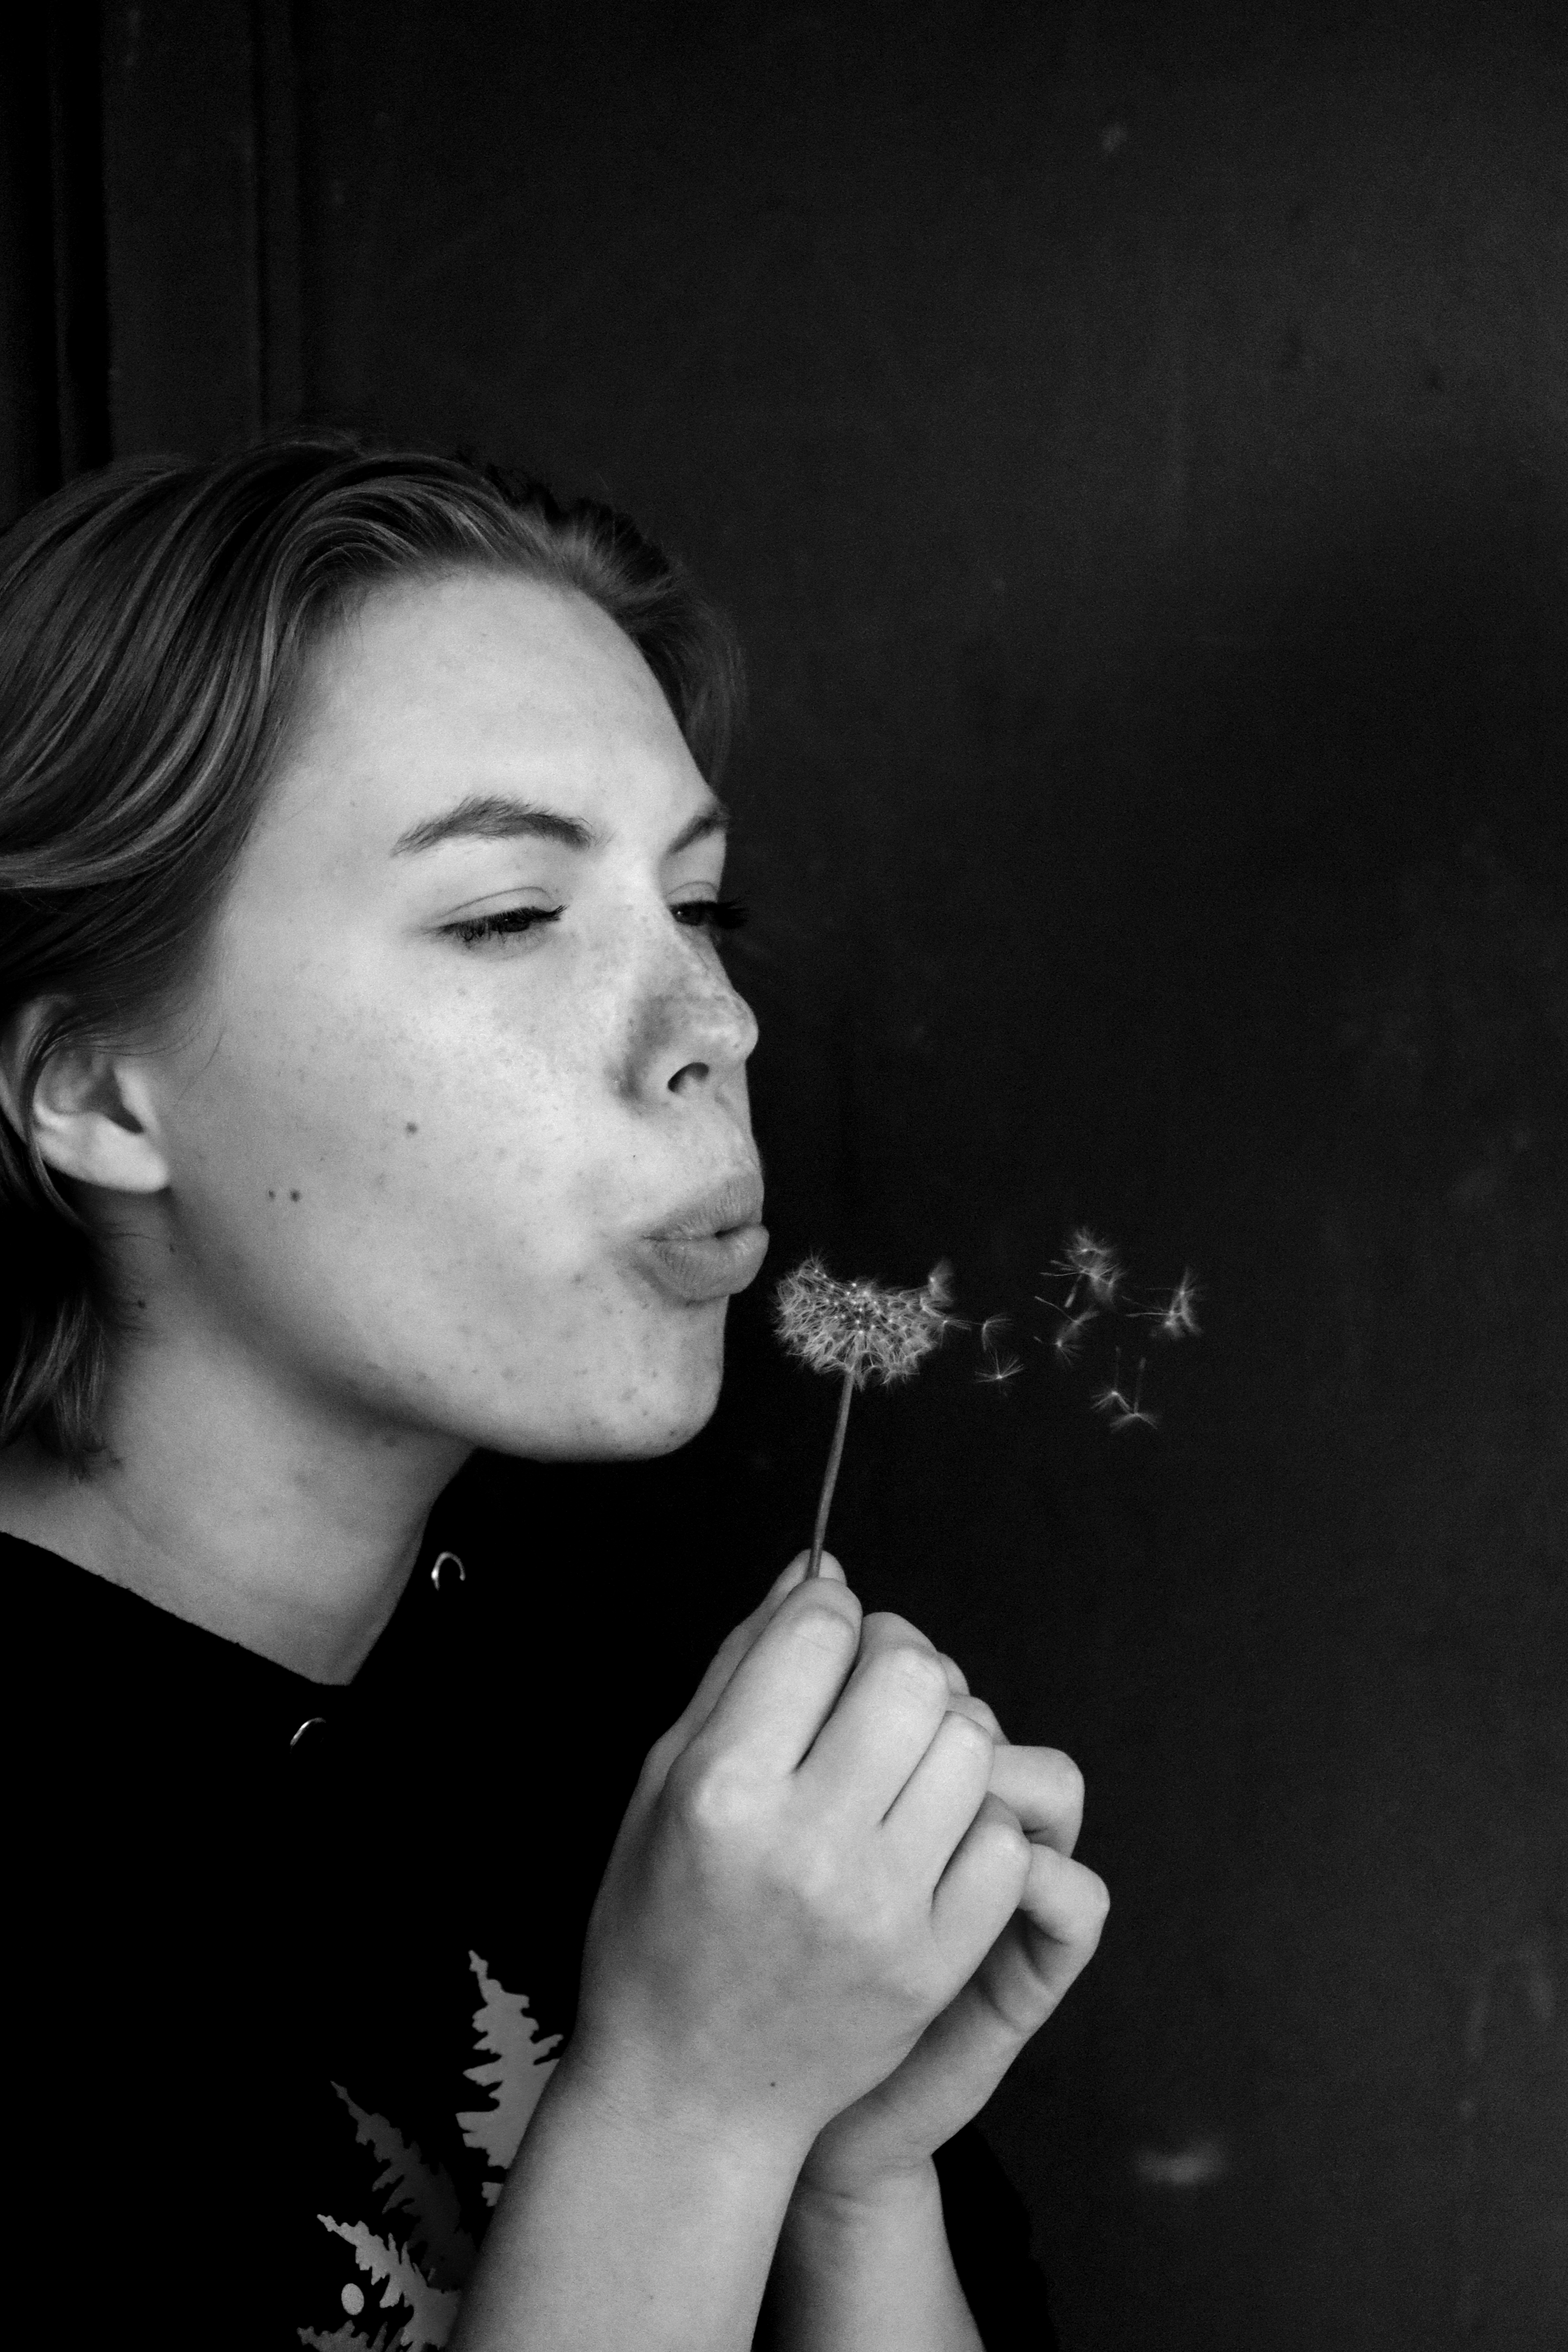 black and white photo of person blowing dandelion fluff